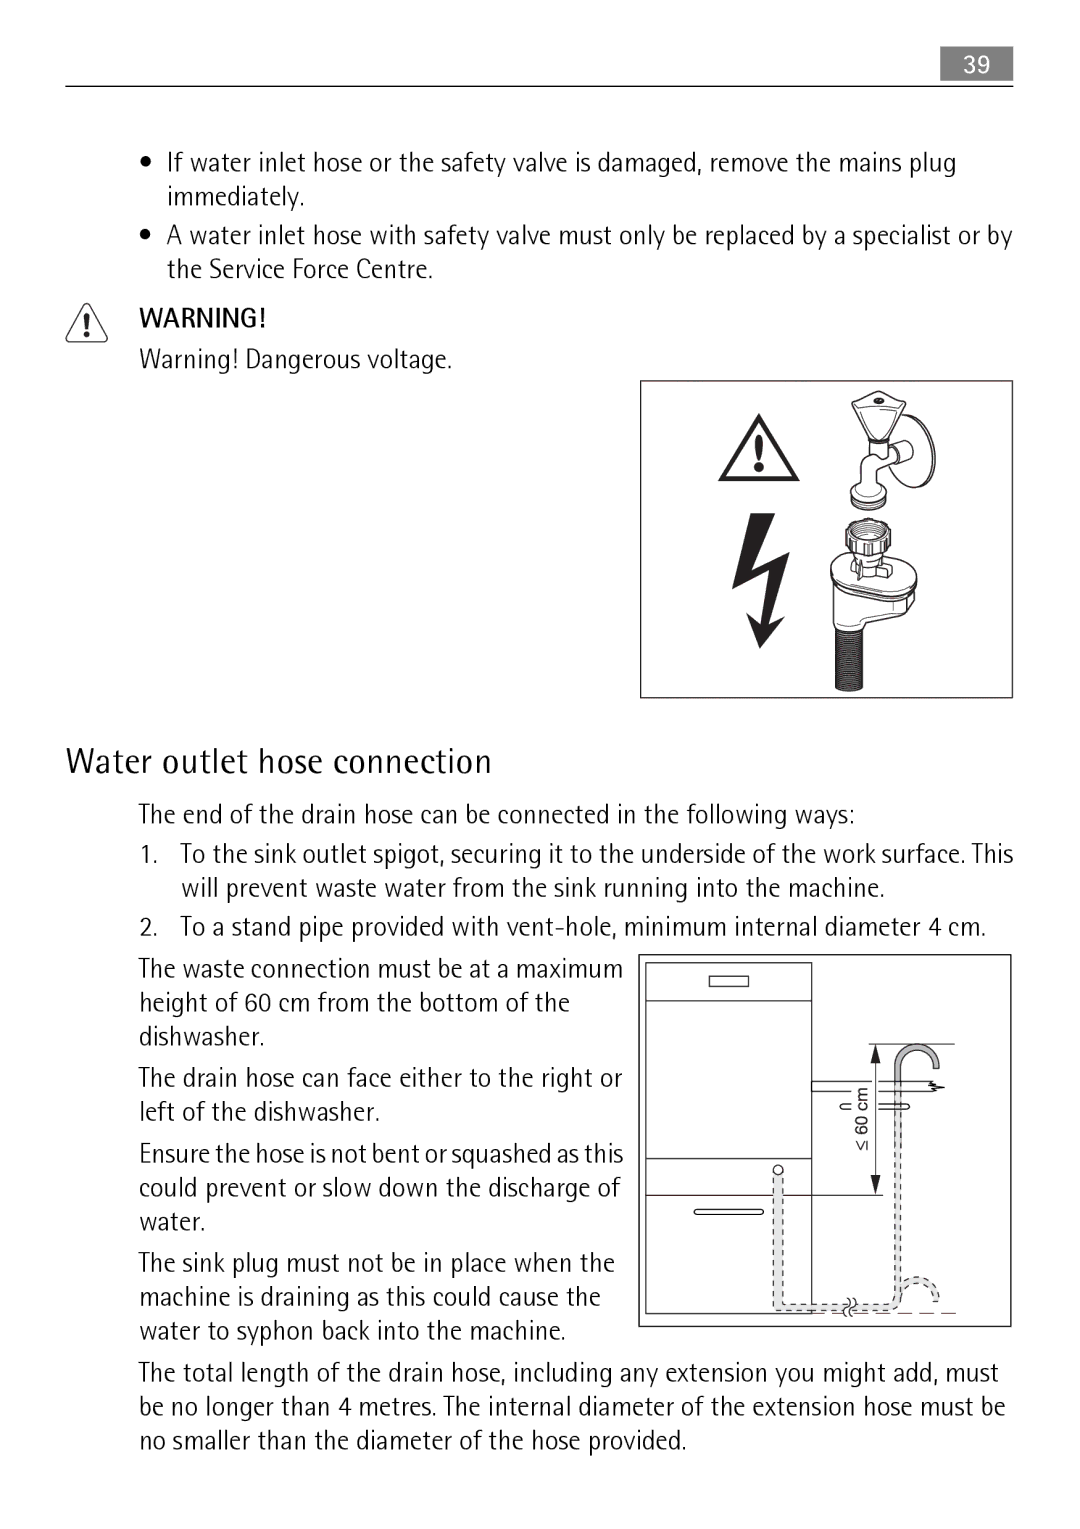 Electrolux FAVORIT 88010 Water outlet hose connection, End of the drain hose can be connected in the following ways 